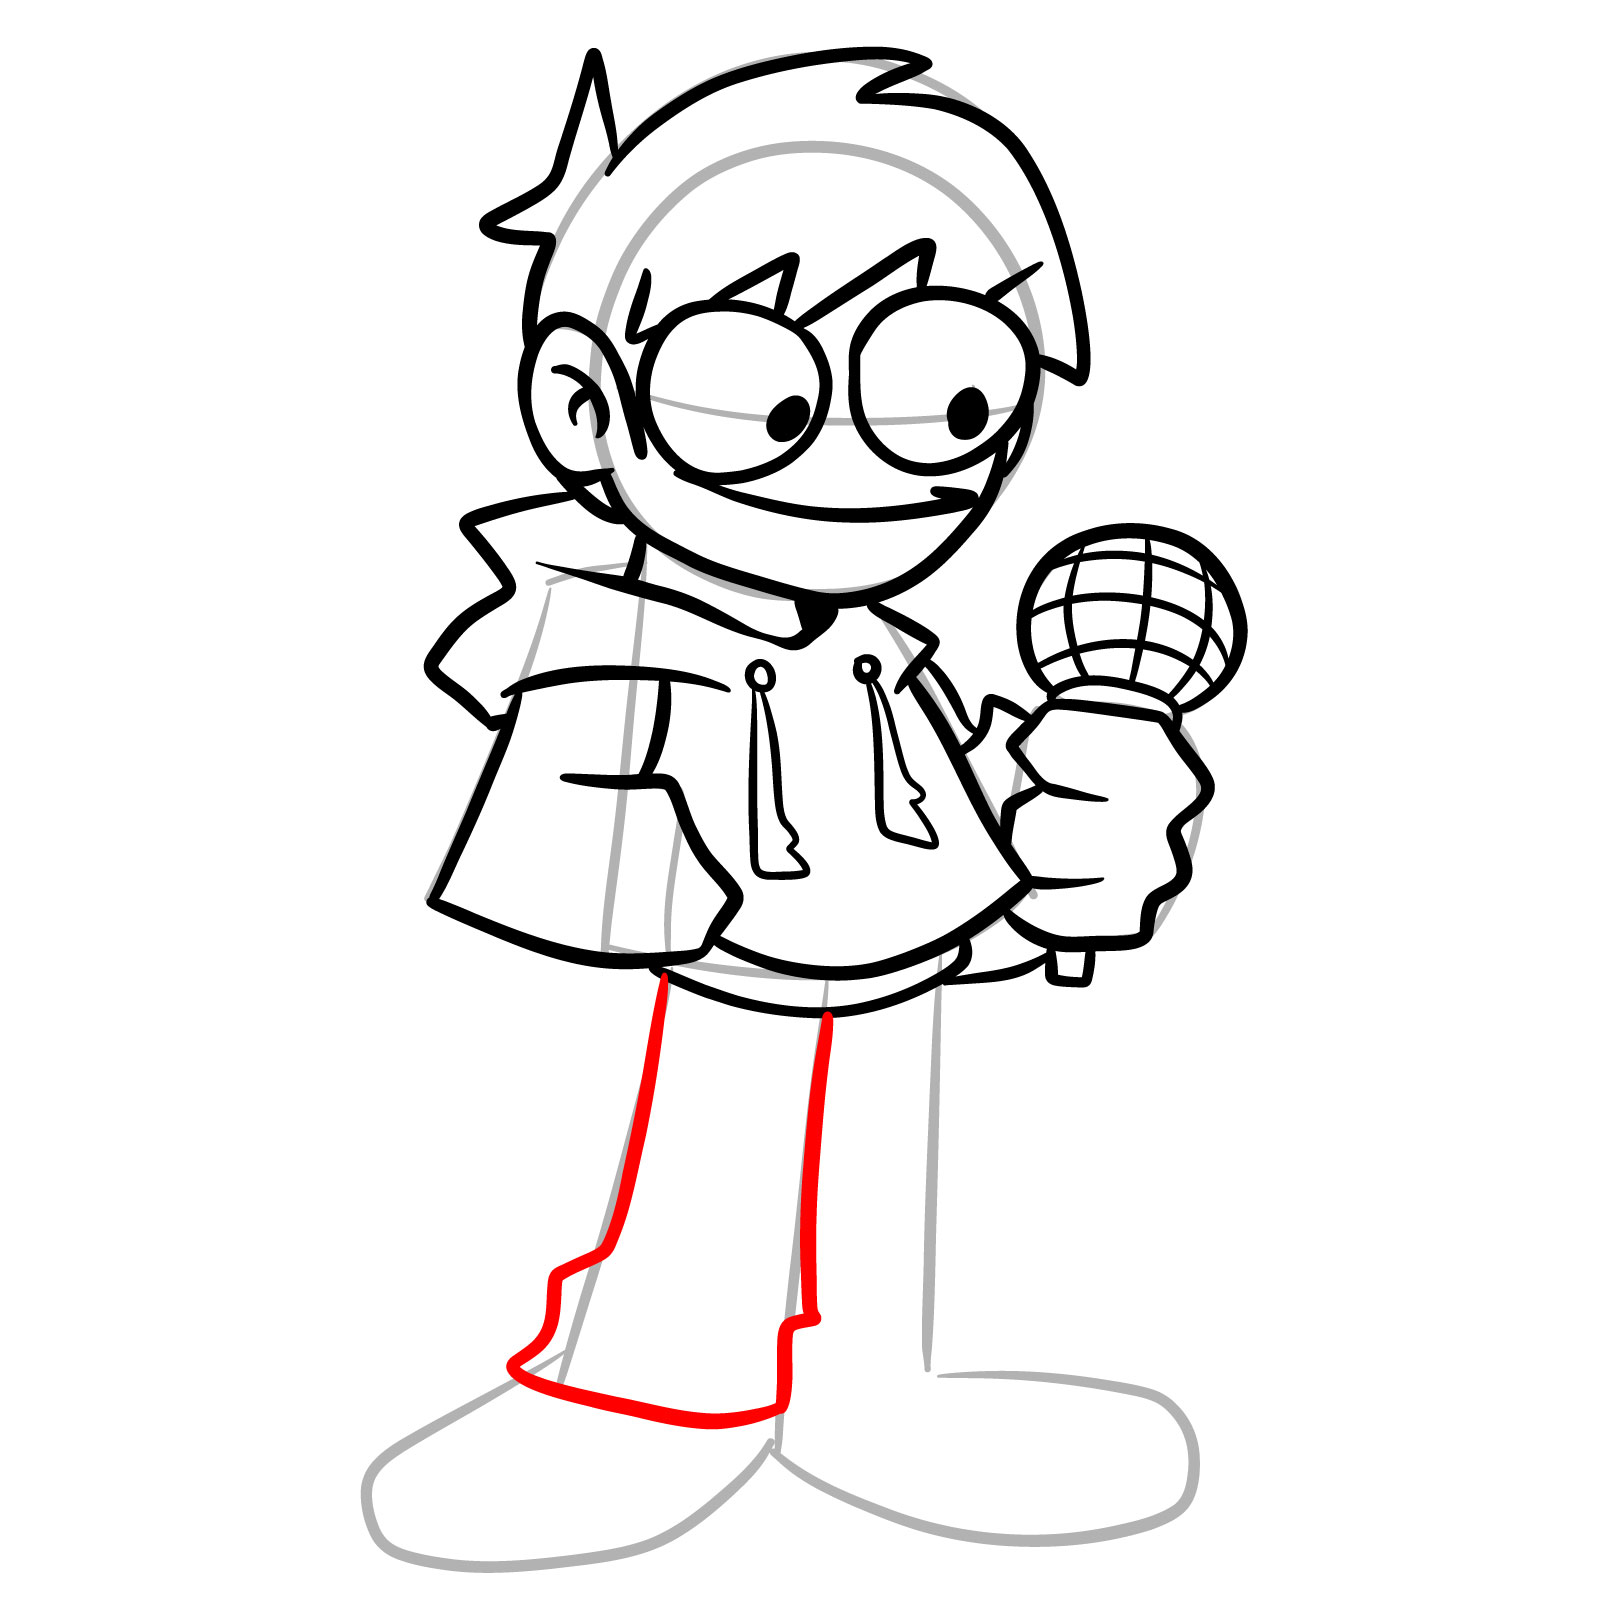 How to draw Edd from Online Vs - step 22